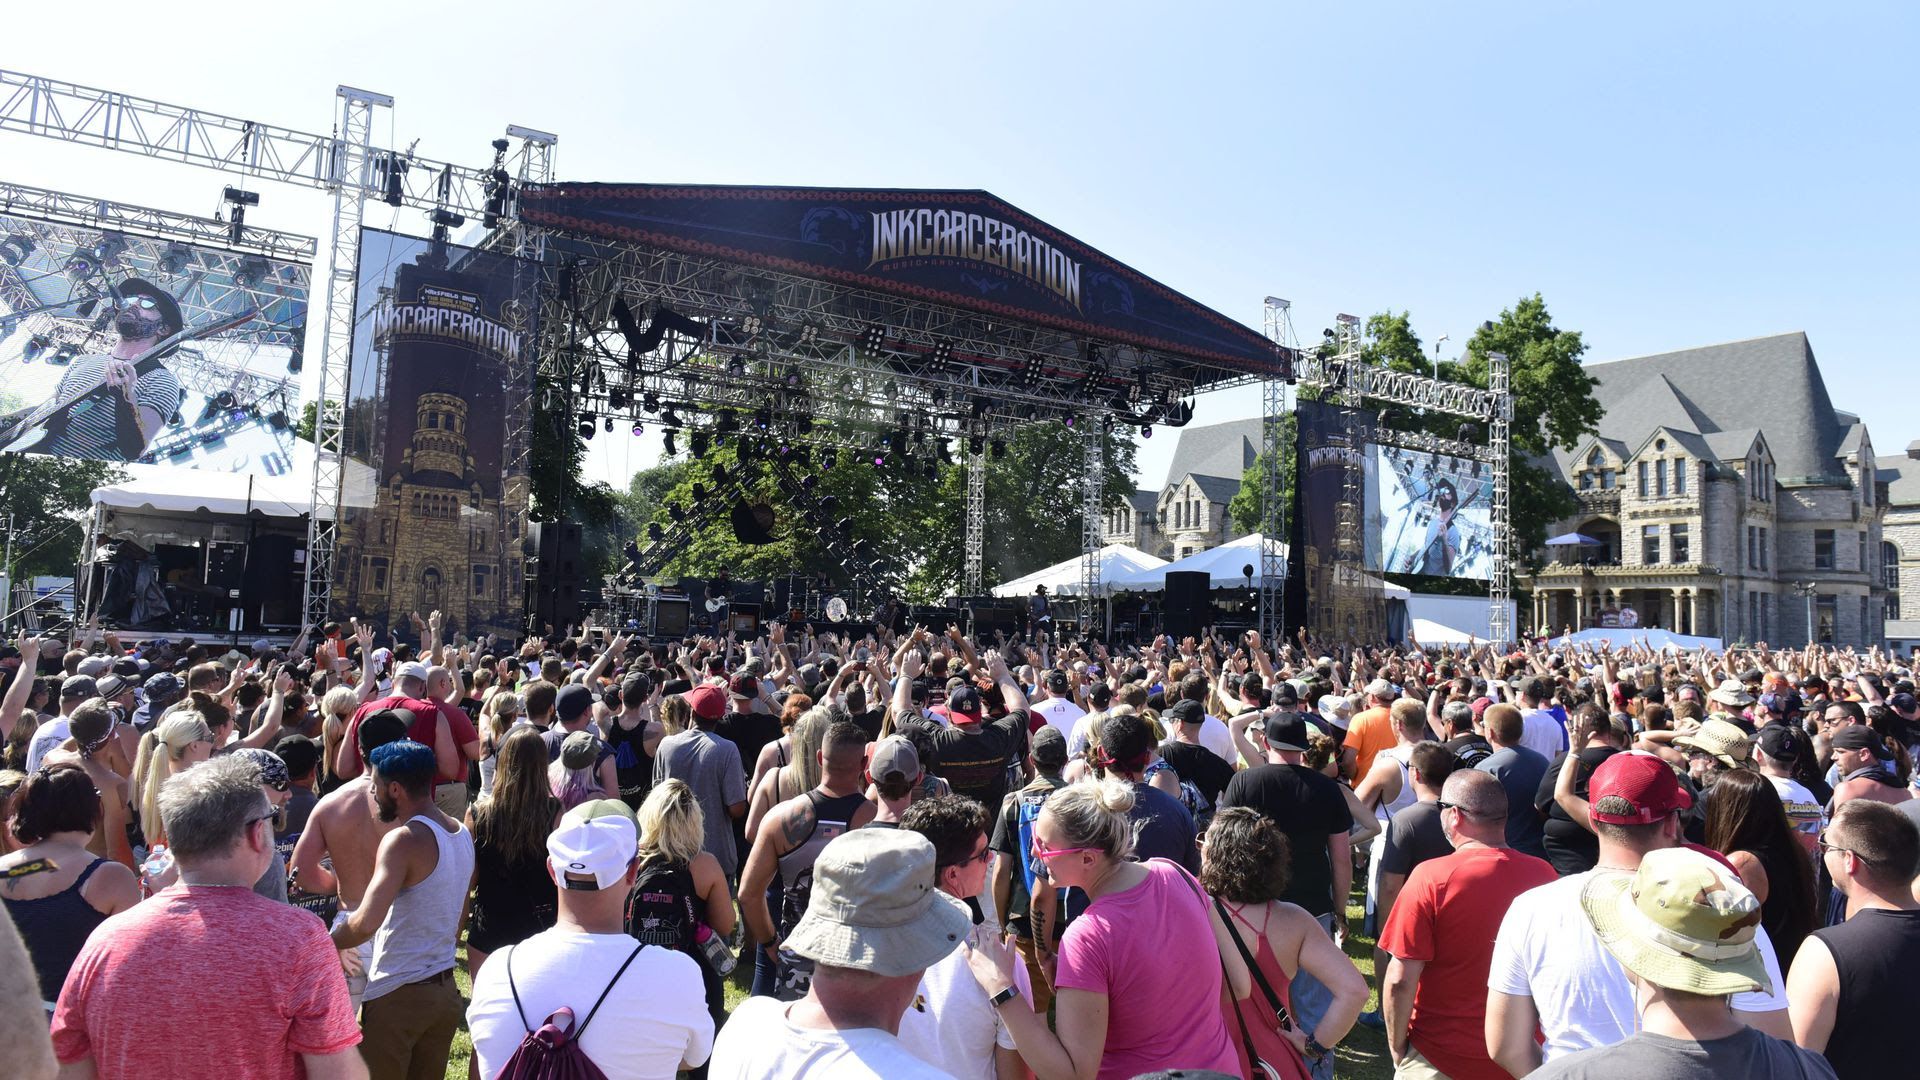 A large crowd gathers near the stage at the 2019 Inkcarceration music festival. 